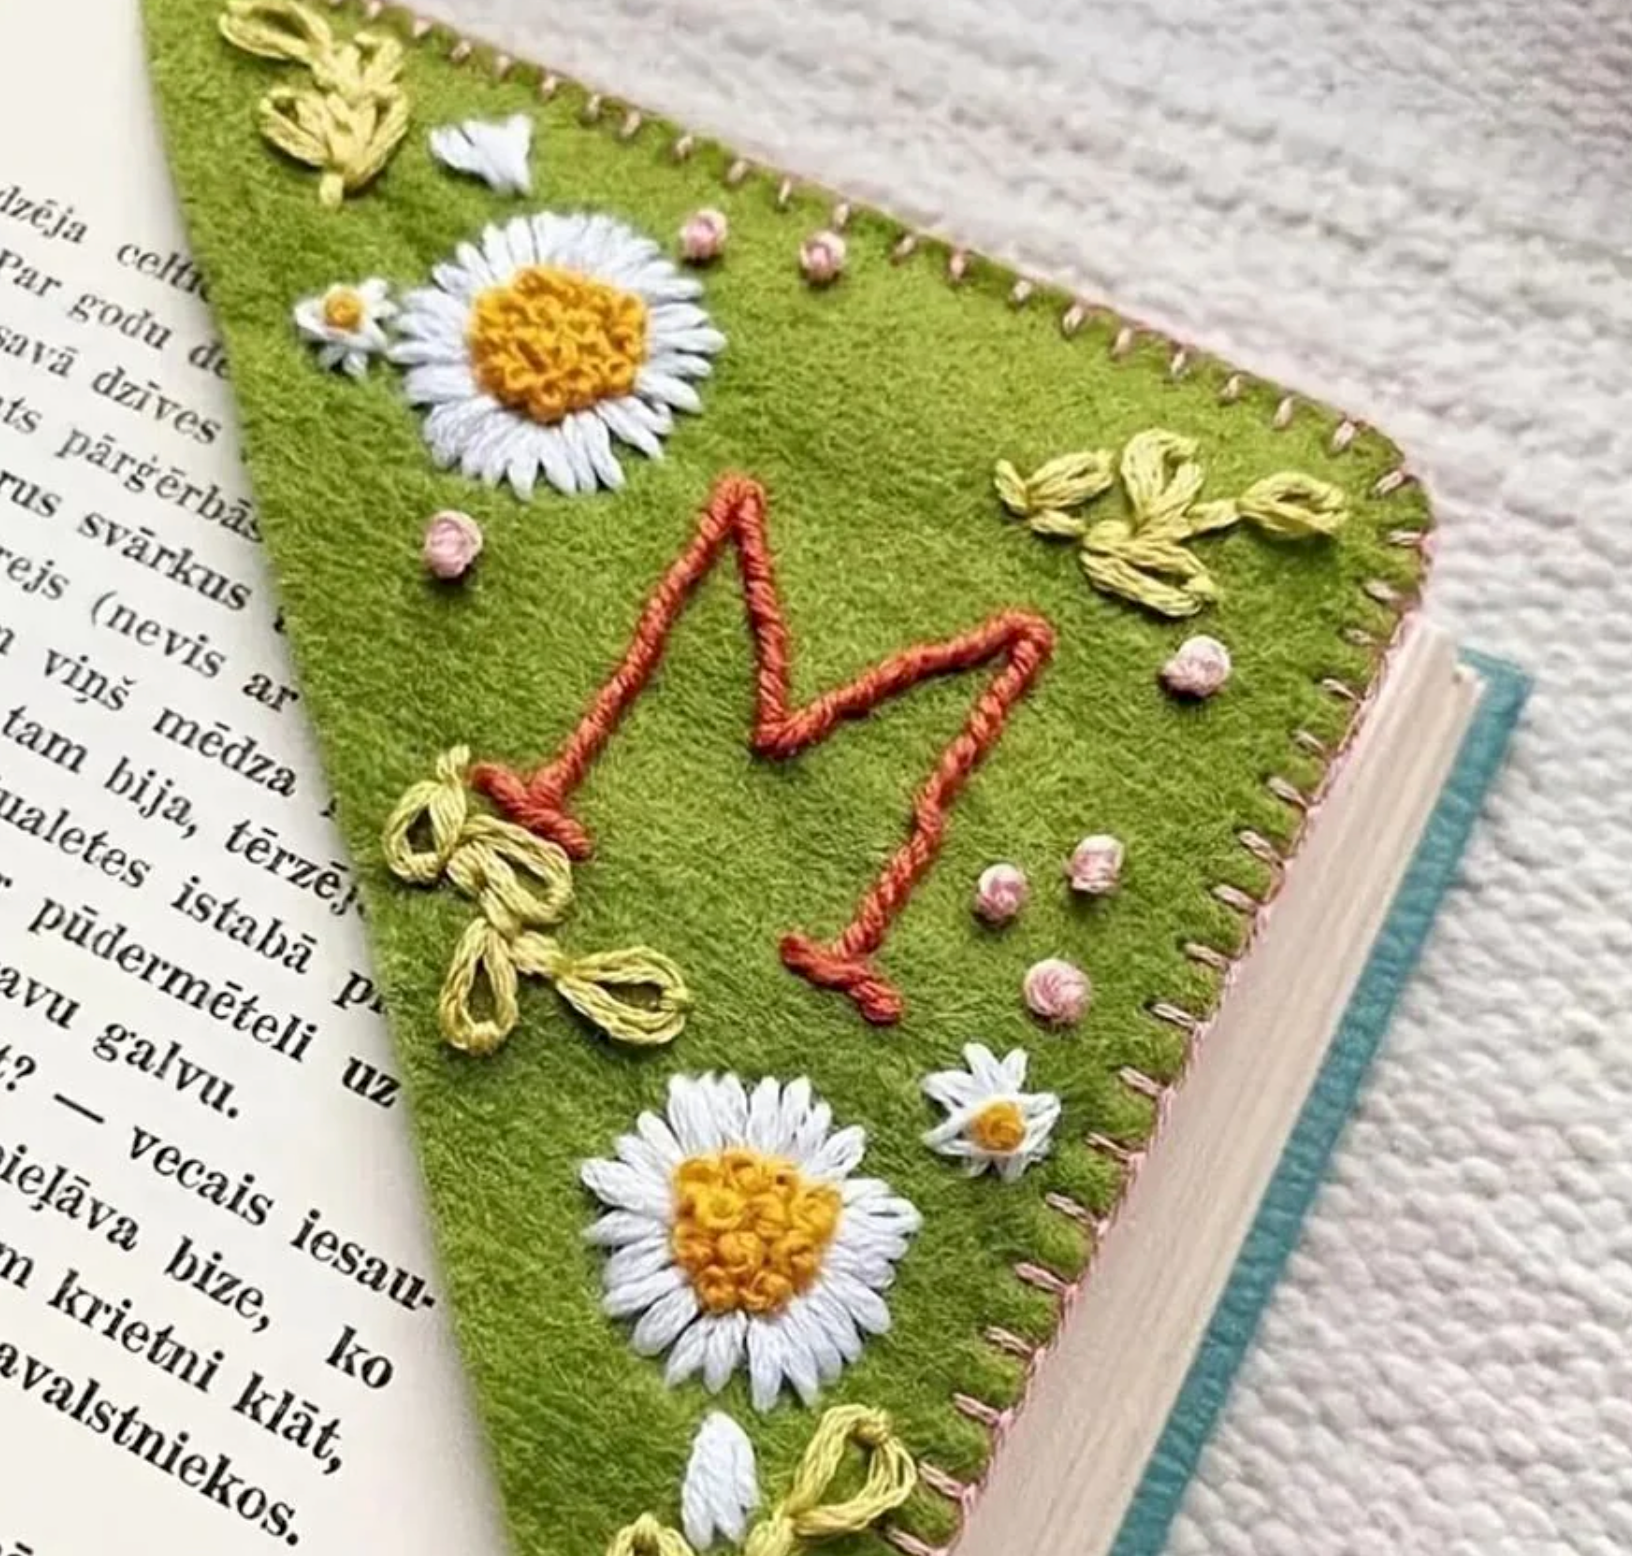 Embroidered Bookmark ships from Canada, the perfect cottagecore Gift!